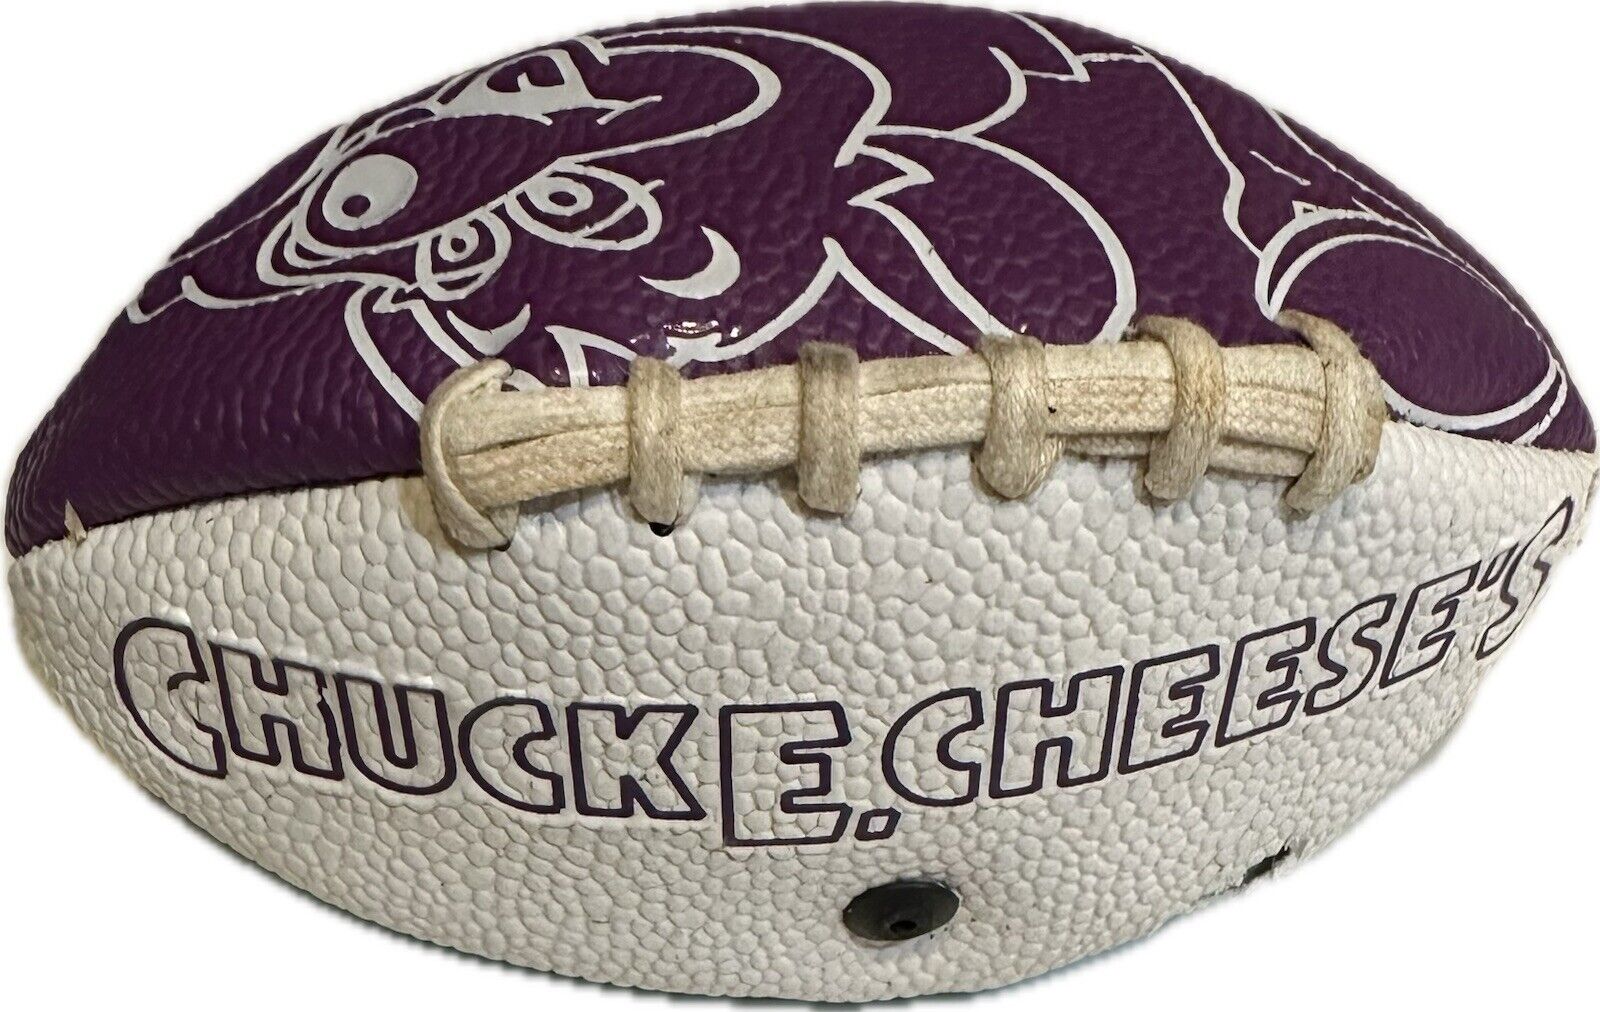 VTG 1990’s CHUCK E CHEESE’s FLAWED FOOTBALL PURPLE GREEN TEAL WHITE COLLECTIBLE